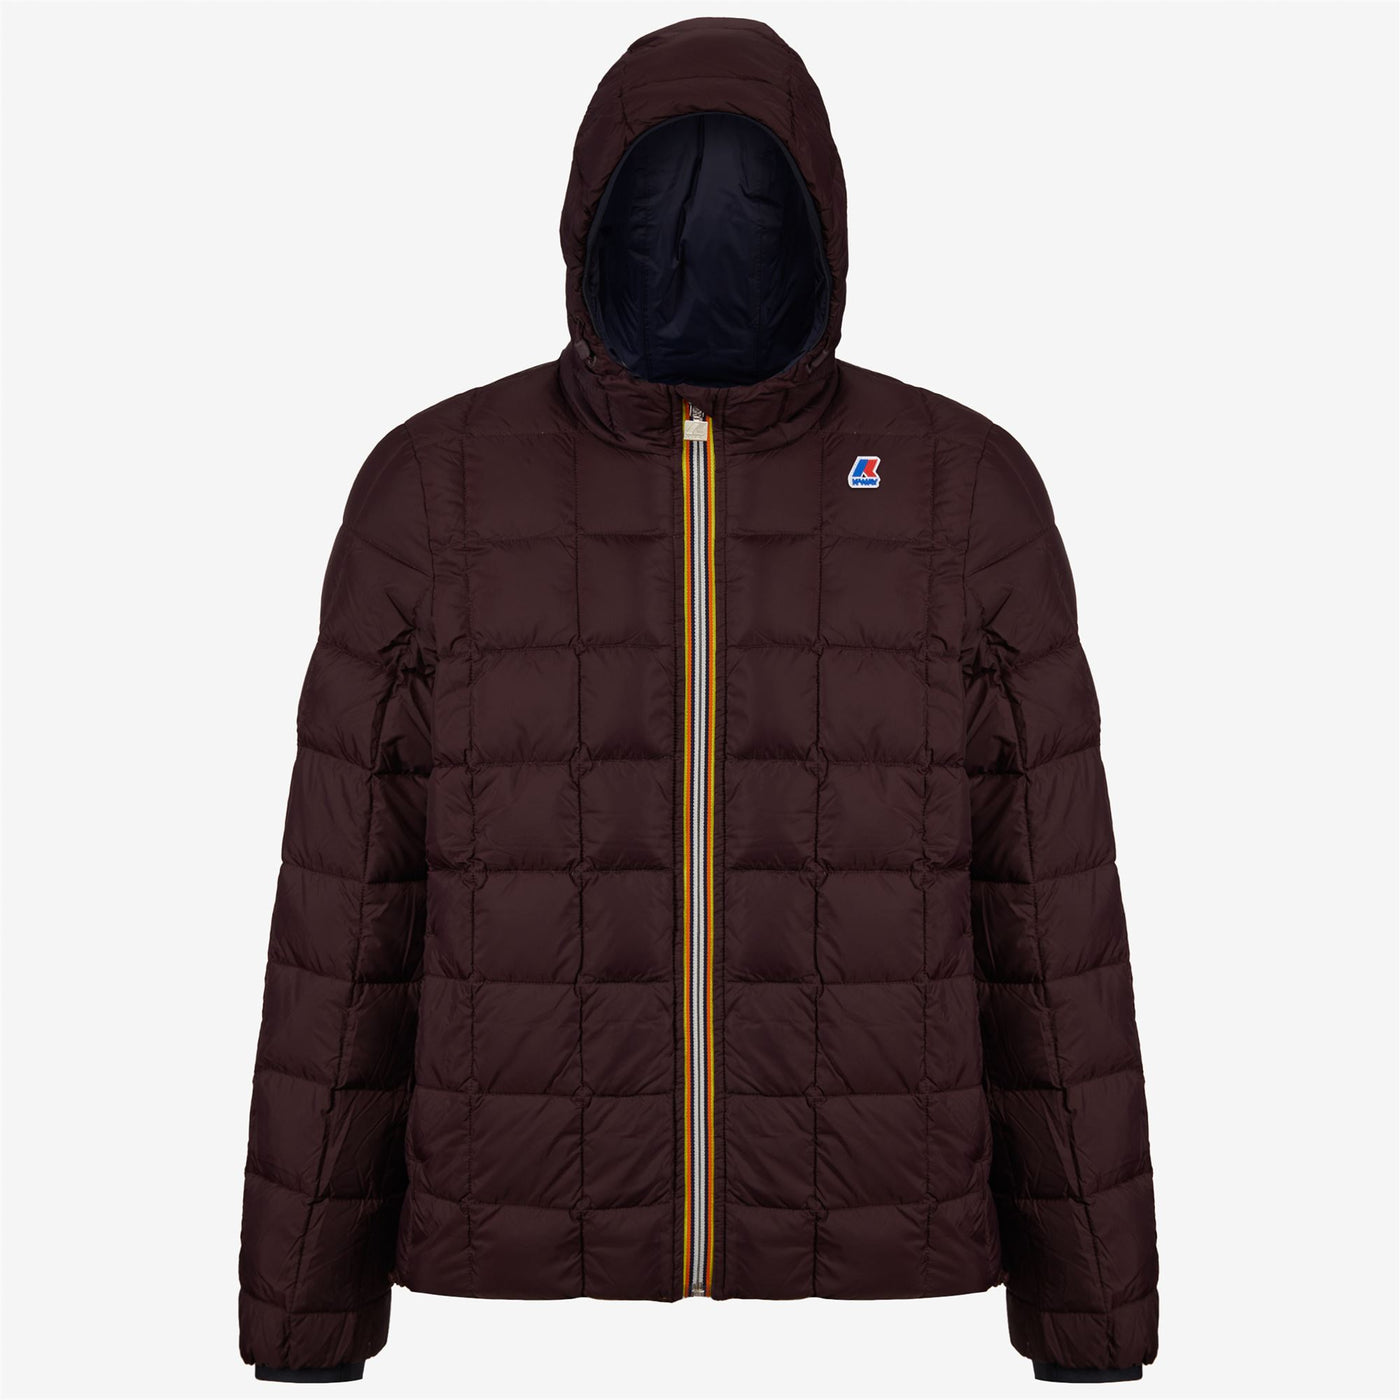 Jackets Man JACQUES THERMO PLUS.2 DOUBLE Short BLUE DEPTH - BROWN BLACKENED Photo (jpg Rgb)			